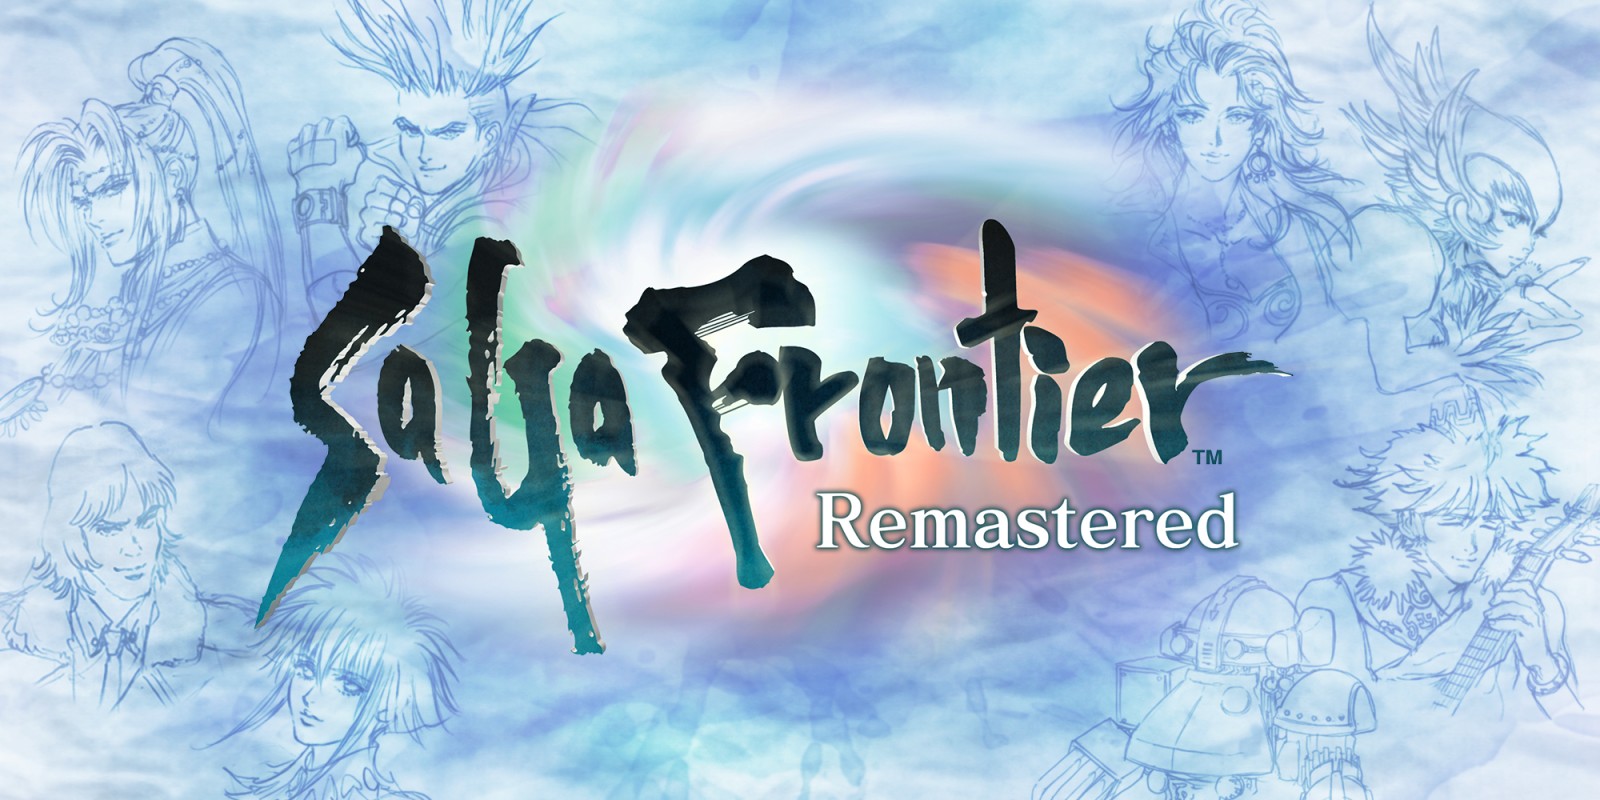 saga frontier remastered physical switch